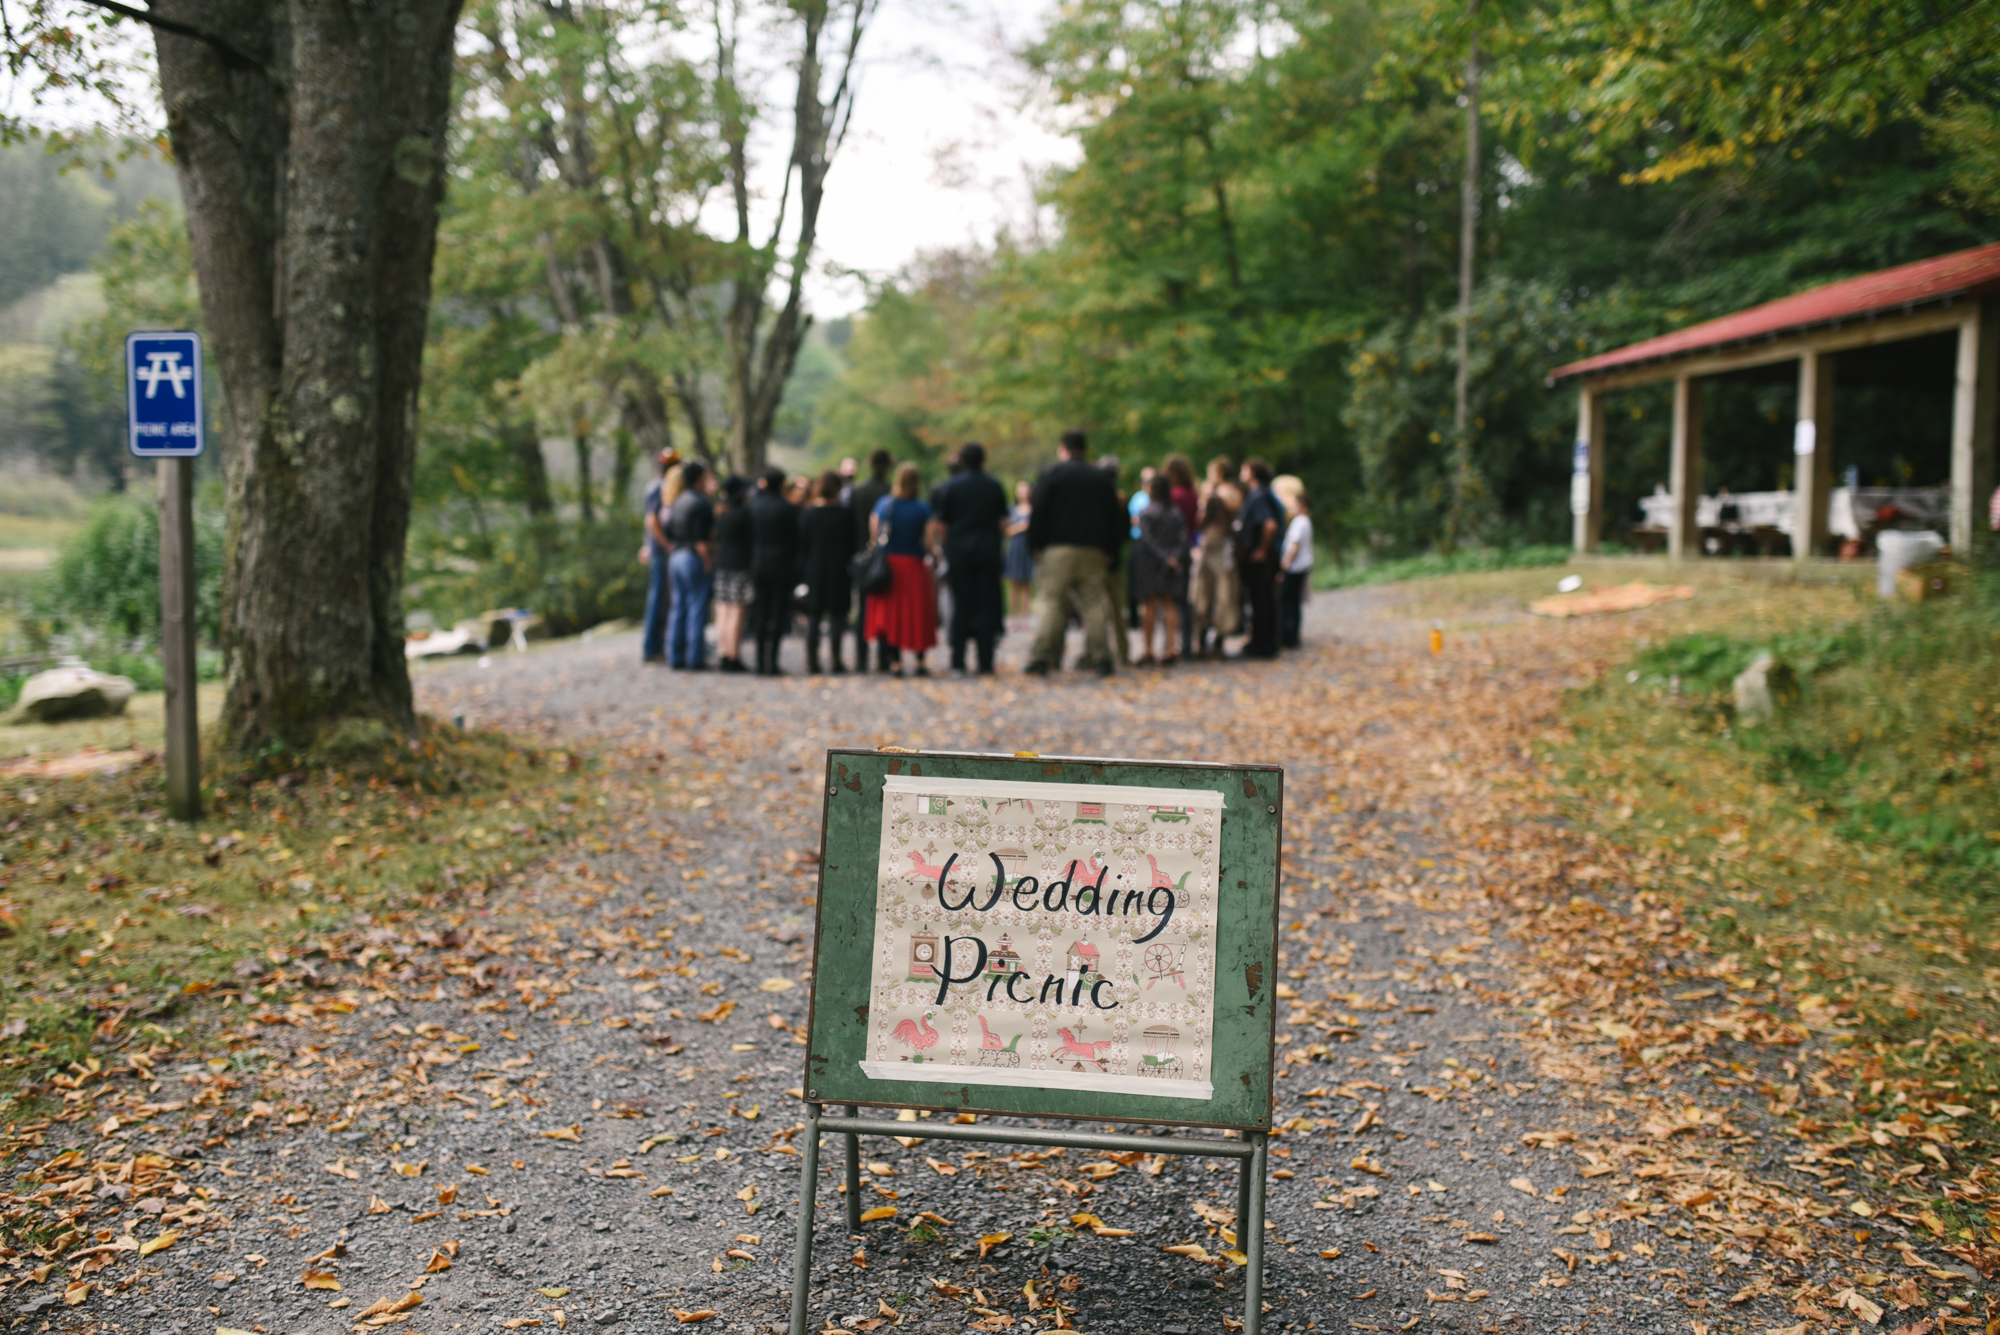  Mountain Wedding, Outdoors, Rustic, West Virginia, Maryland Wedding Photographer, DIY, Casual, Signage for Wedding Picnic, Guests gathered outside 